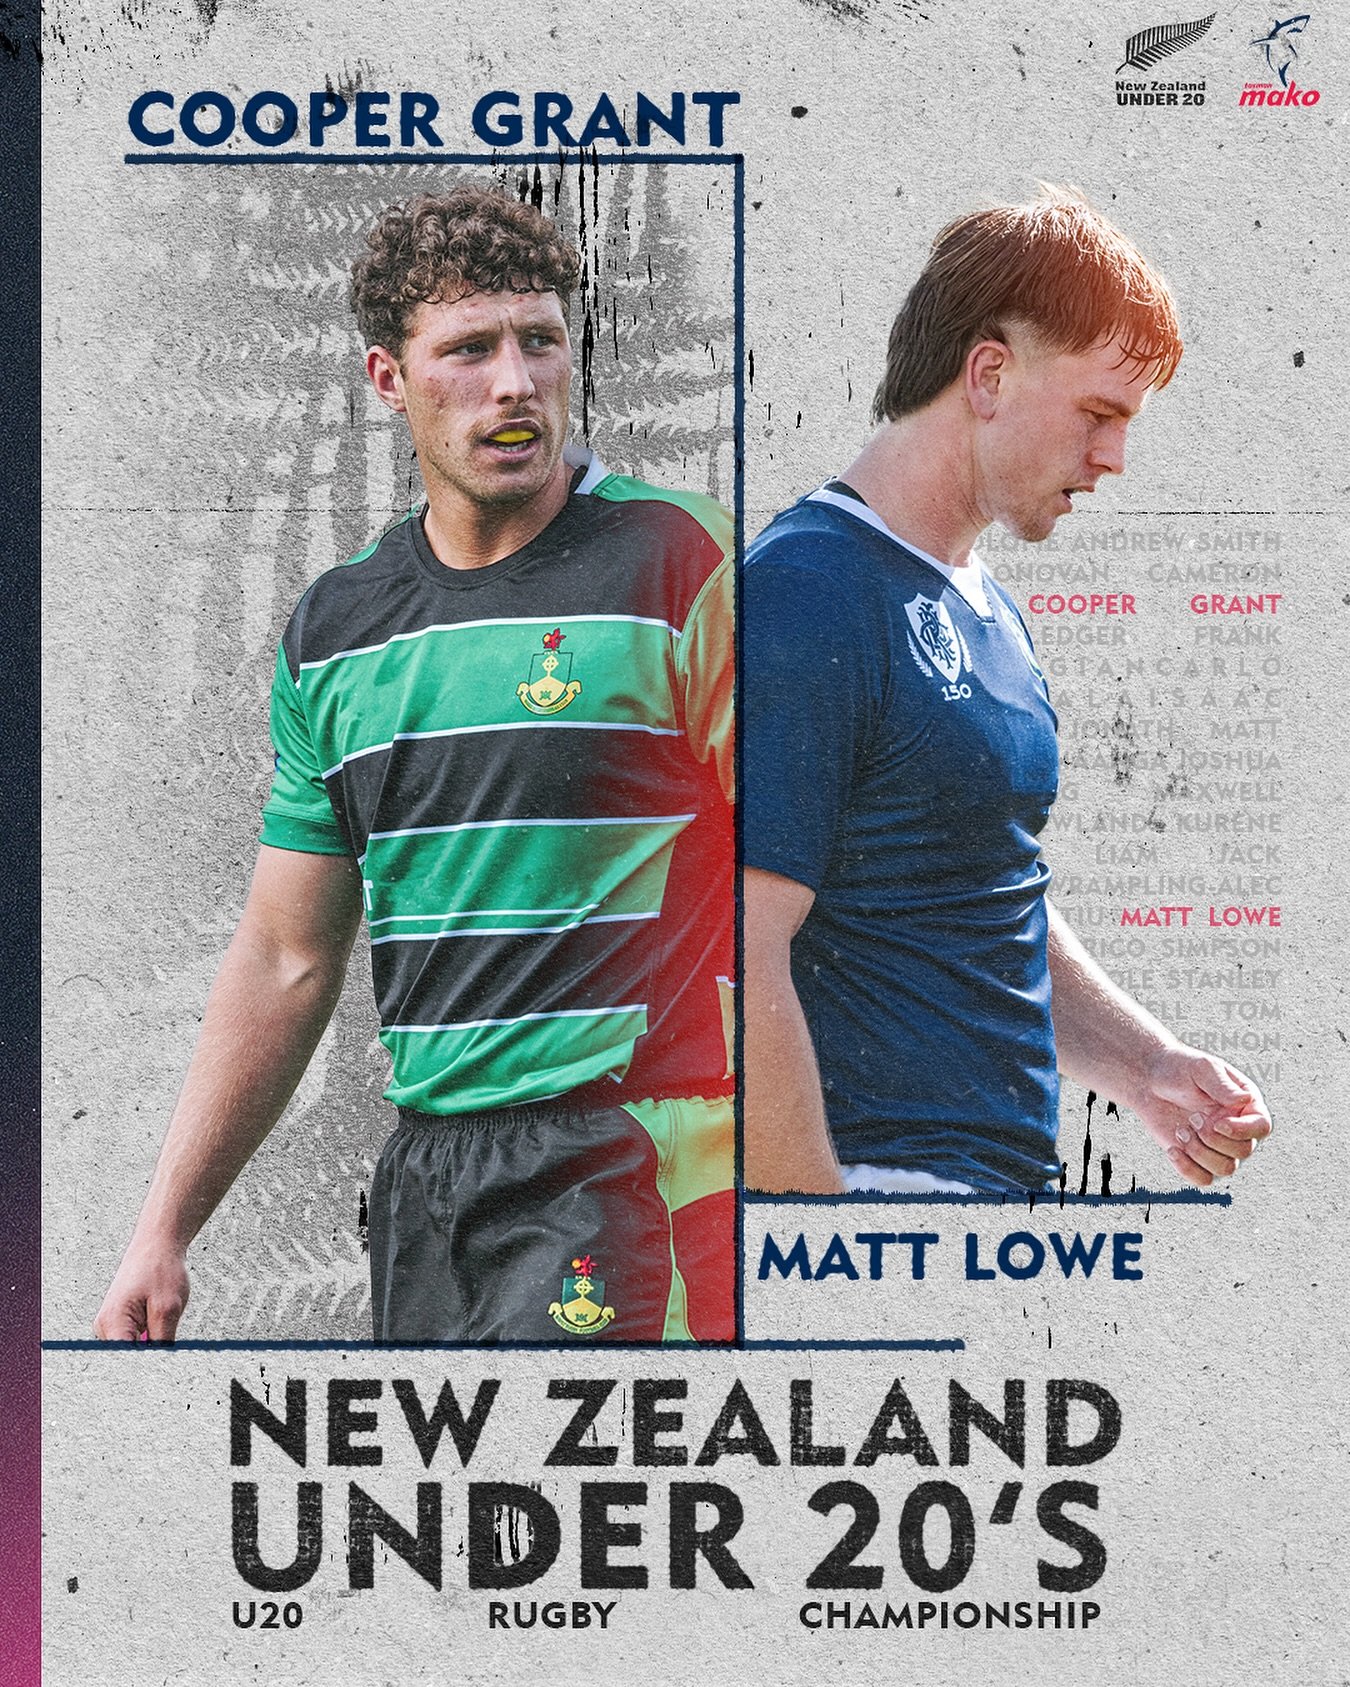 Congratulations to our Tasman lads, Matt Lowe &amp; Cooper Grant, on being named in the 2024 NZ U20&rsquo;s squad 🔥 

They will take part in the inaugural U20 Rugby Championship, which kicks off 2nd May in Queensland, Australia.
#finzup #u20rugby